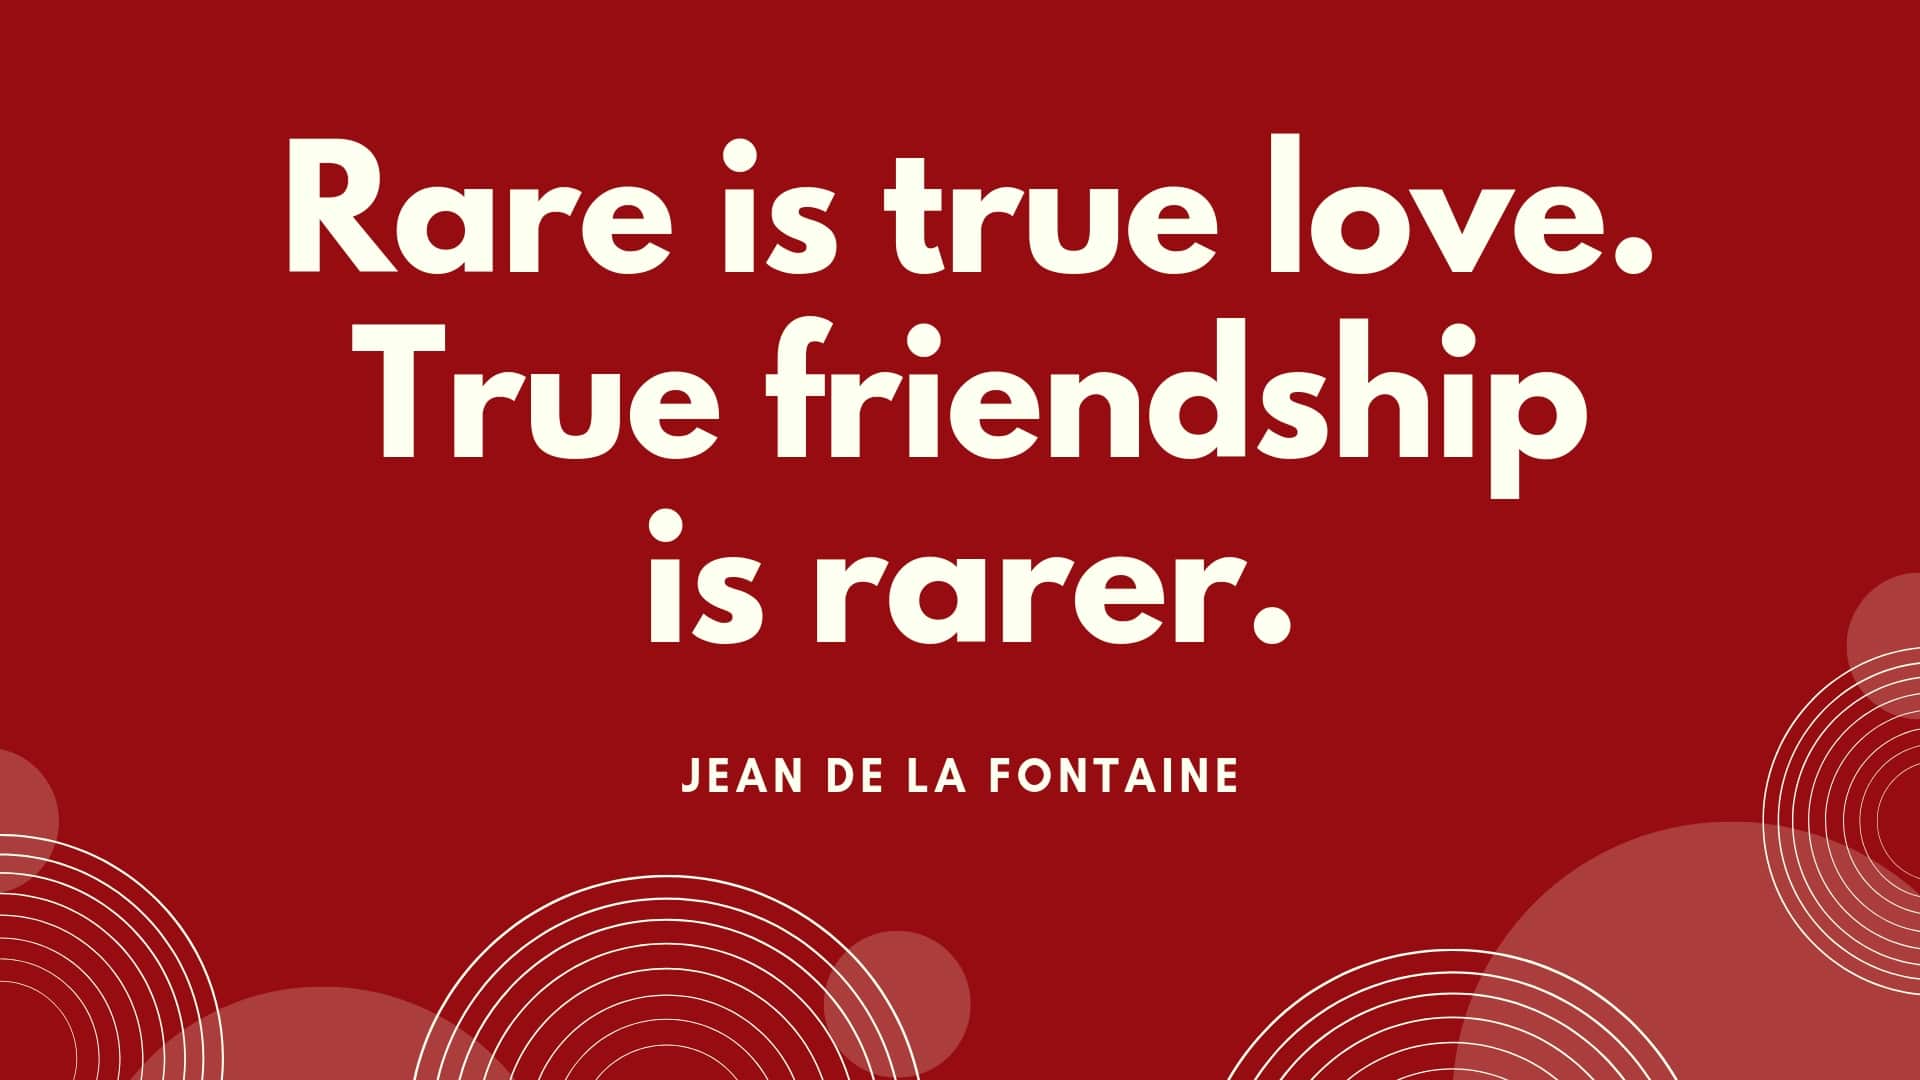 25 Quotes About Friendship and Love [Images + FREE PDF] - QuoteBold